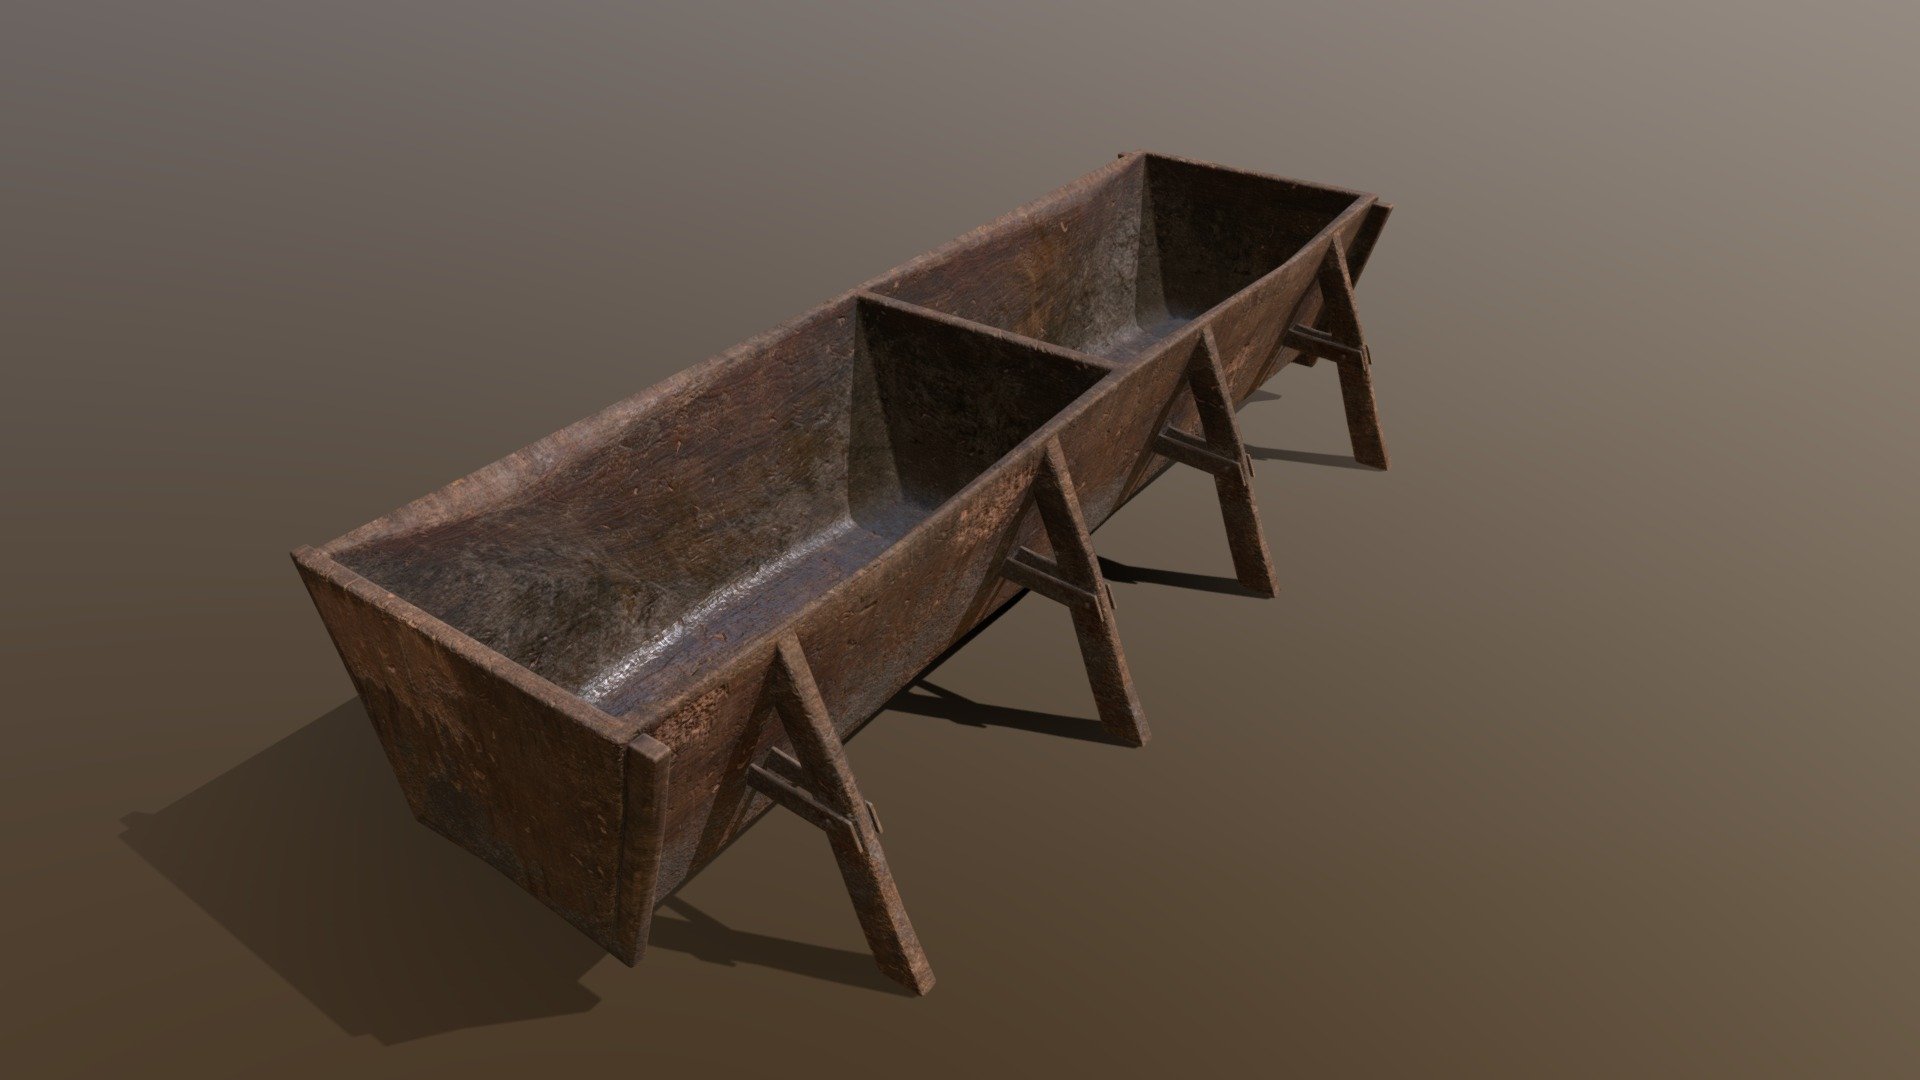 Old Medieval Trough 3D Model. This model contains the Old Medieval Trough itself 

All modeled in Maya, textured with Substance Painter.

The model was built to scale and is UV unwrapped properly. Contains a 4K and 2K texture set.  

⦁   3816 tris. 

⦁   Contains: .FBX .OBJ and .DAE

⦁   Model has clean topology. No Ngons.

⦁   Built to scale

⦁   Unwrapped UV Map

⦁   4K Texture set

⦁   High quality details

⦁   Based on real life references

⦁   Renders done in Marmoset Toolbag

Polycount: 

Verts 2110

Edges 3990

Faces 1908

Tris 3816

If you have any questions please feel free to ask me 3d model